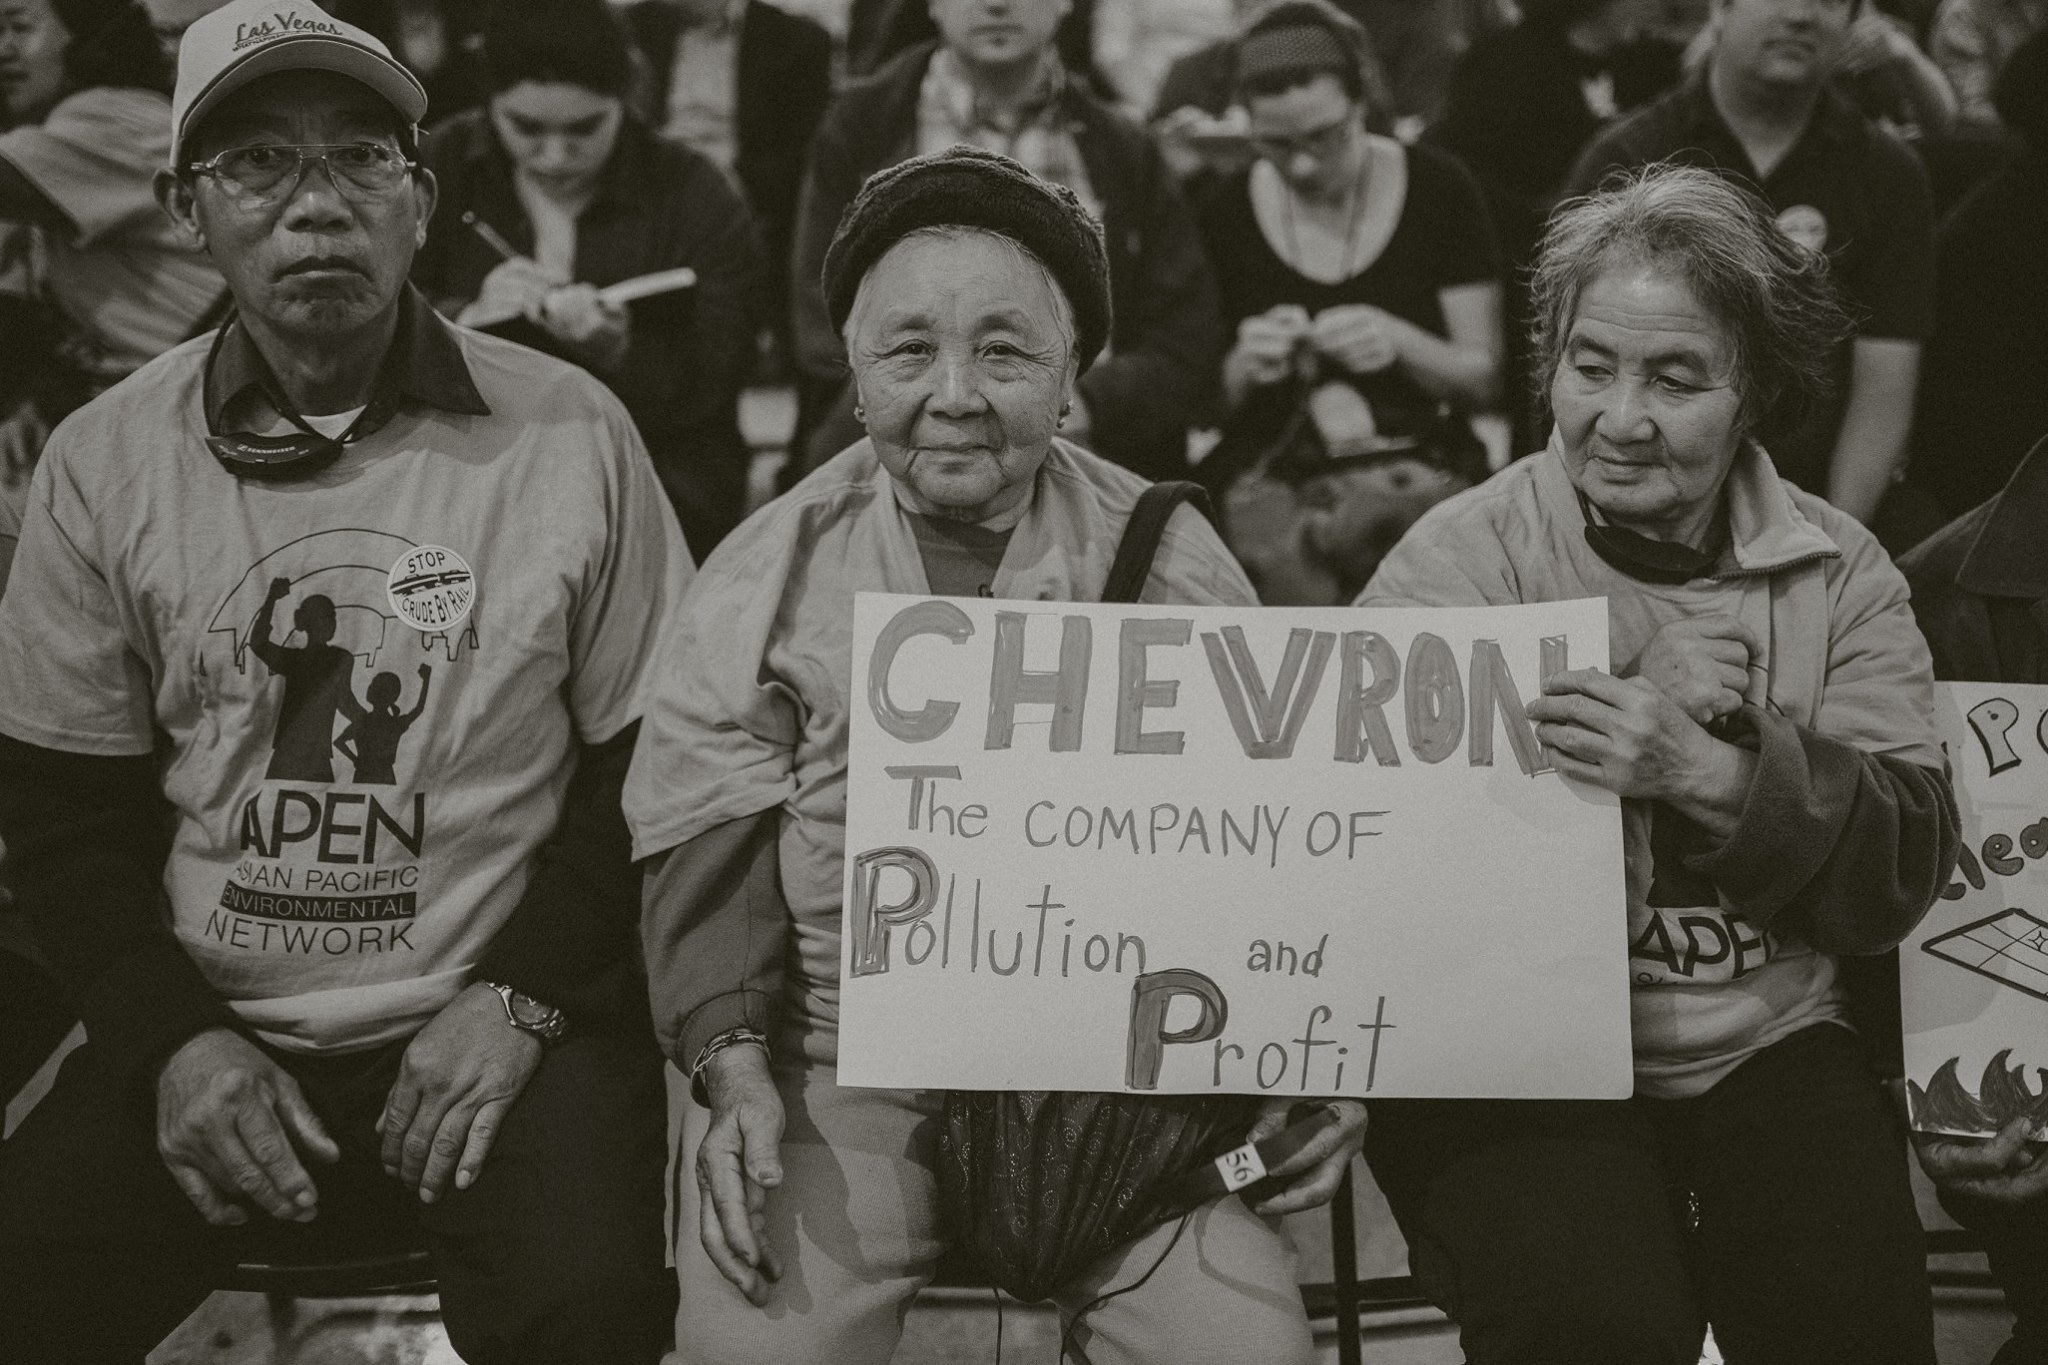 APEN Members hold a sign saying "Chevron, company of pollution and profit"